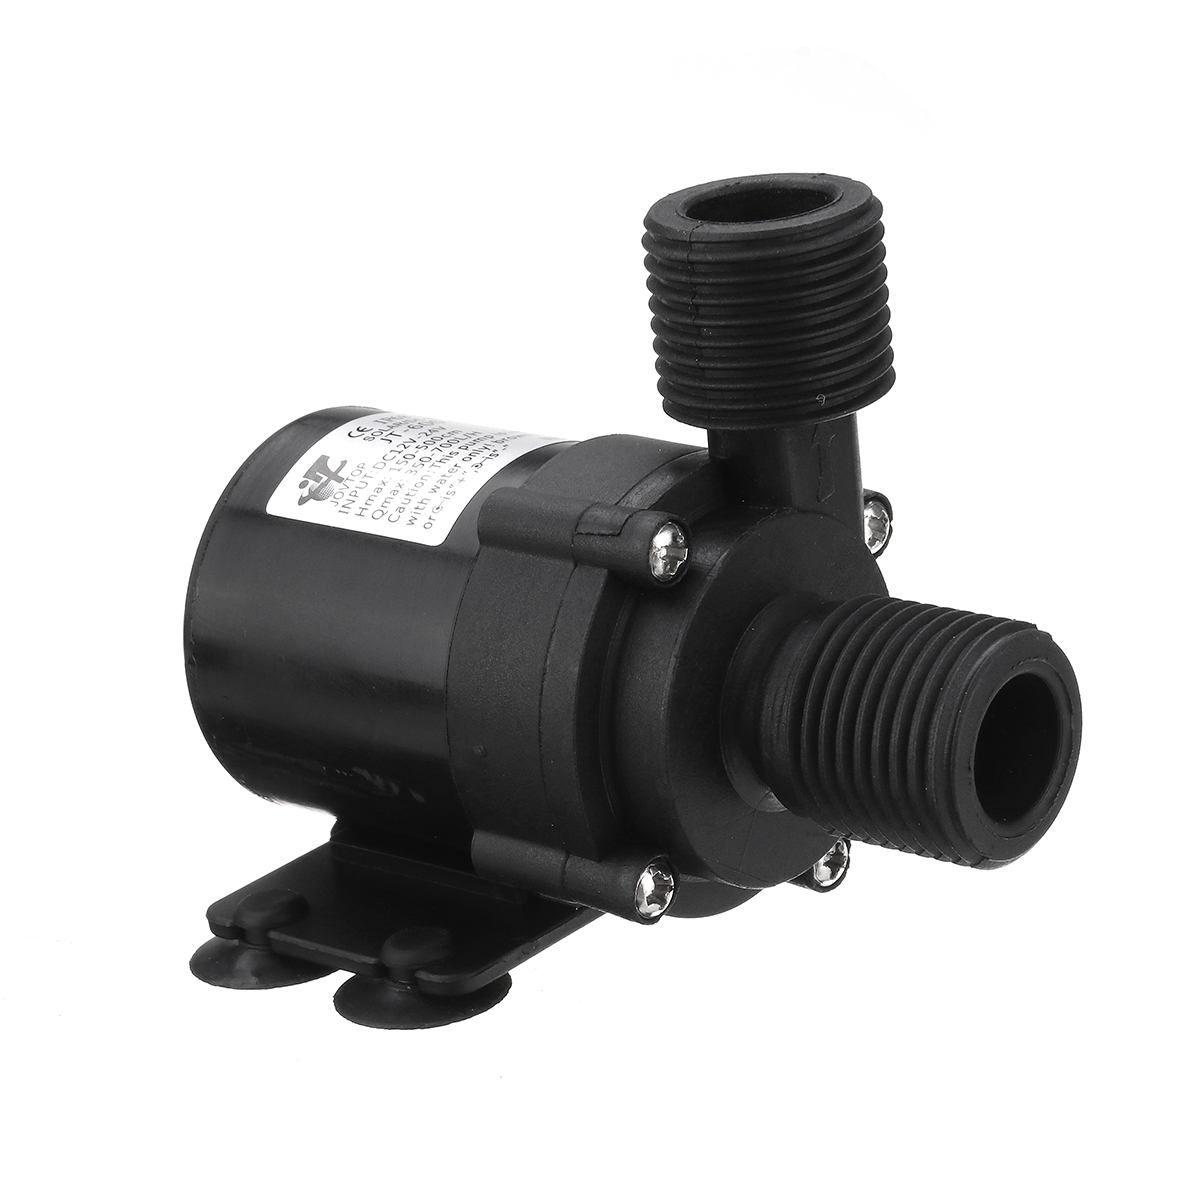 24V12V-Hot-Water-Pump-for-Circulating-Micro-DC-Water-Pump-With-12-Inch-Threaded-Multifunction-Brushl-1435180-3